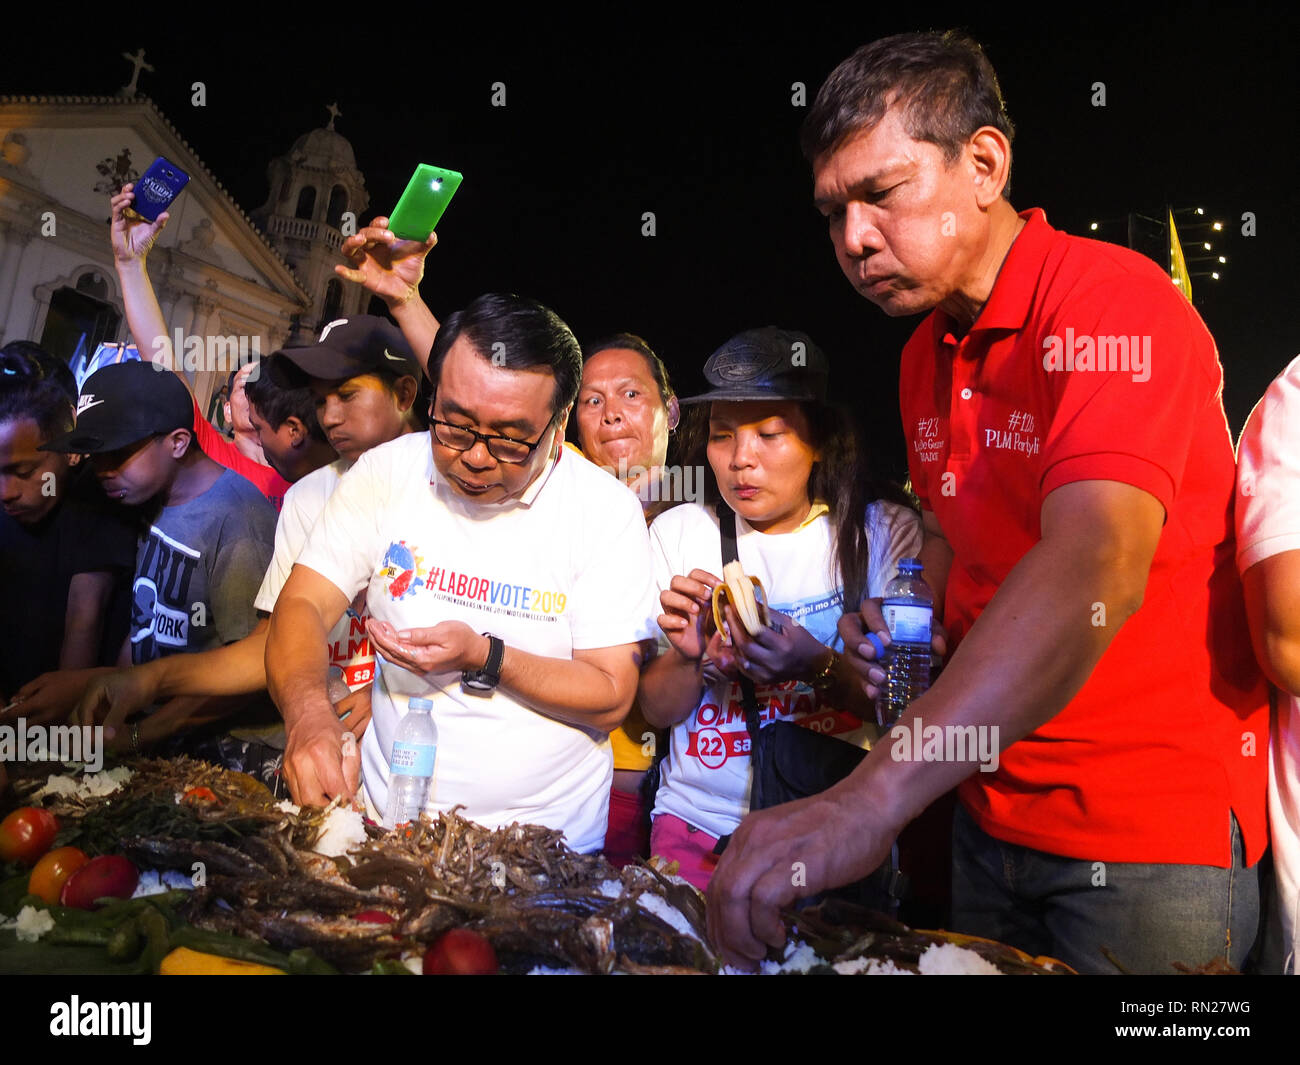 Former representative Neri Colmenares (L) and labor leader Leody de Guzman (R) participates in the boodle fight. 'Labor Win' a coalition of labor leaders running for Senate, said they are the only ones who have the 'real' credentials to push for pro-poor policies unlike other candidates for this year elections. the policial party 'Partido ng Lakas ng Masa' offers themselves as alternatives in this year's elections. They say they don't belong to either the administration or opposition Stock Photo